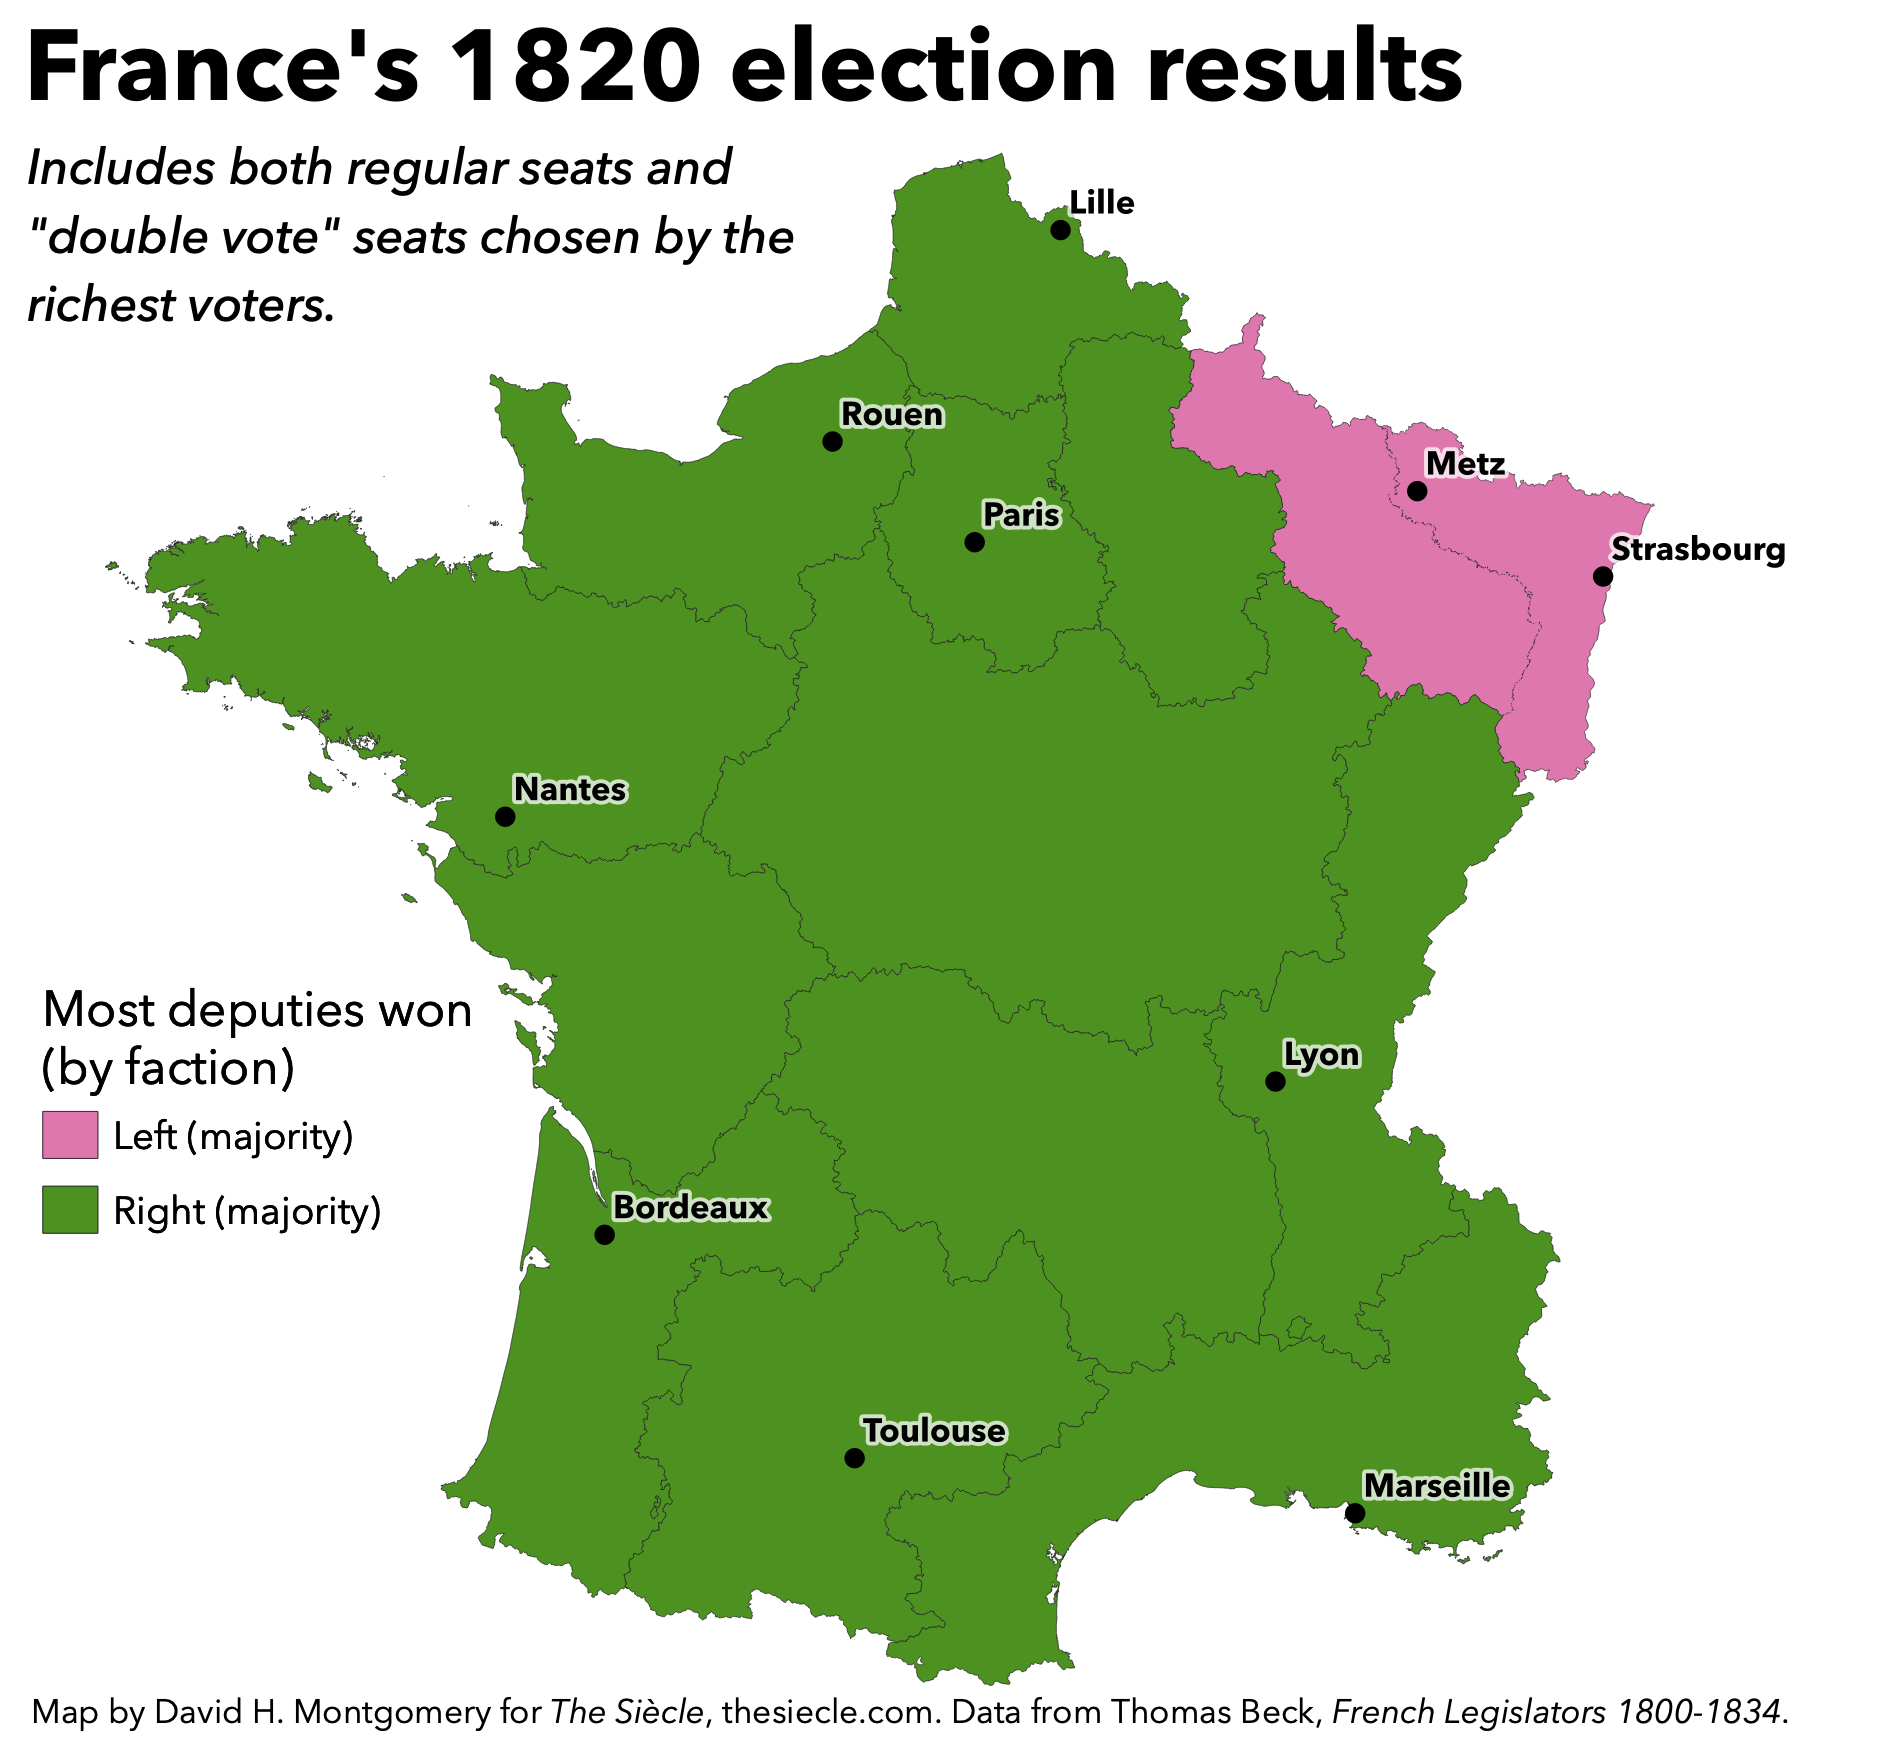 A map of the results of the 1820 French legislative elections